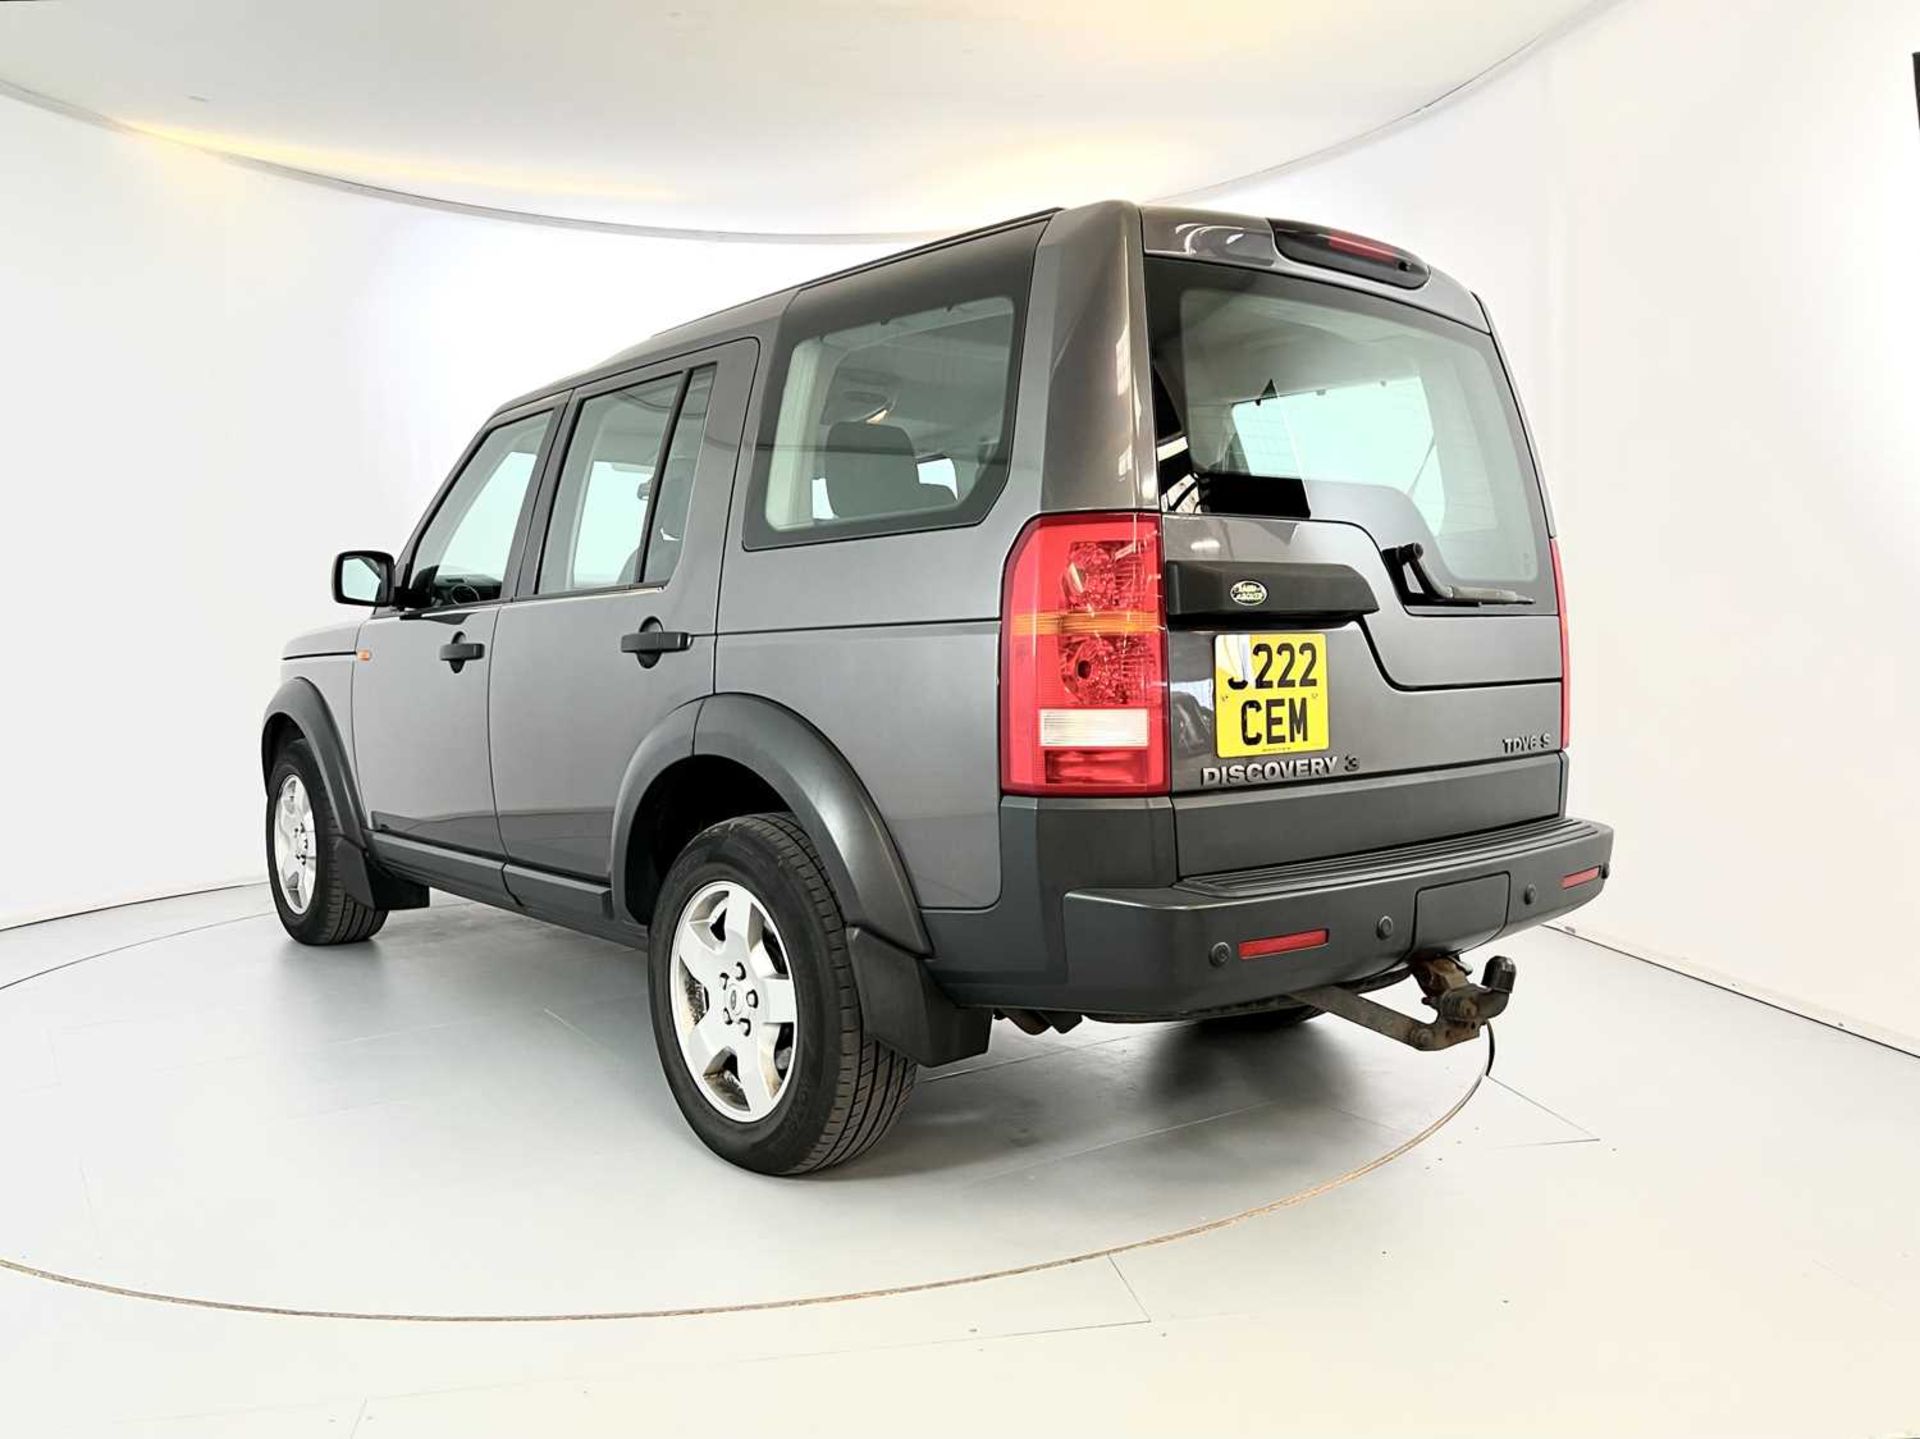 2005 Land Rover Discovery - Image 7 of 36